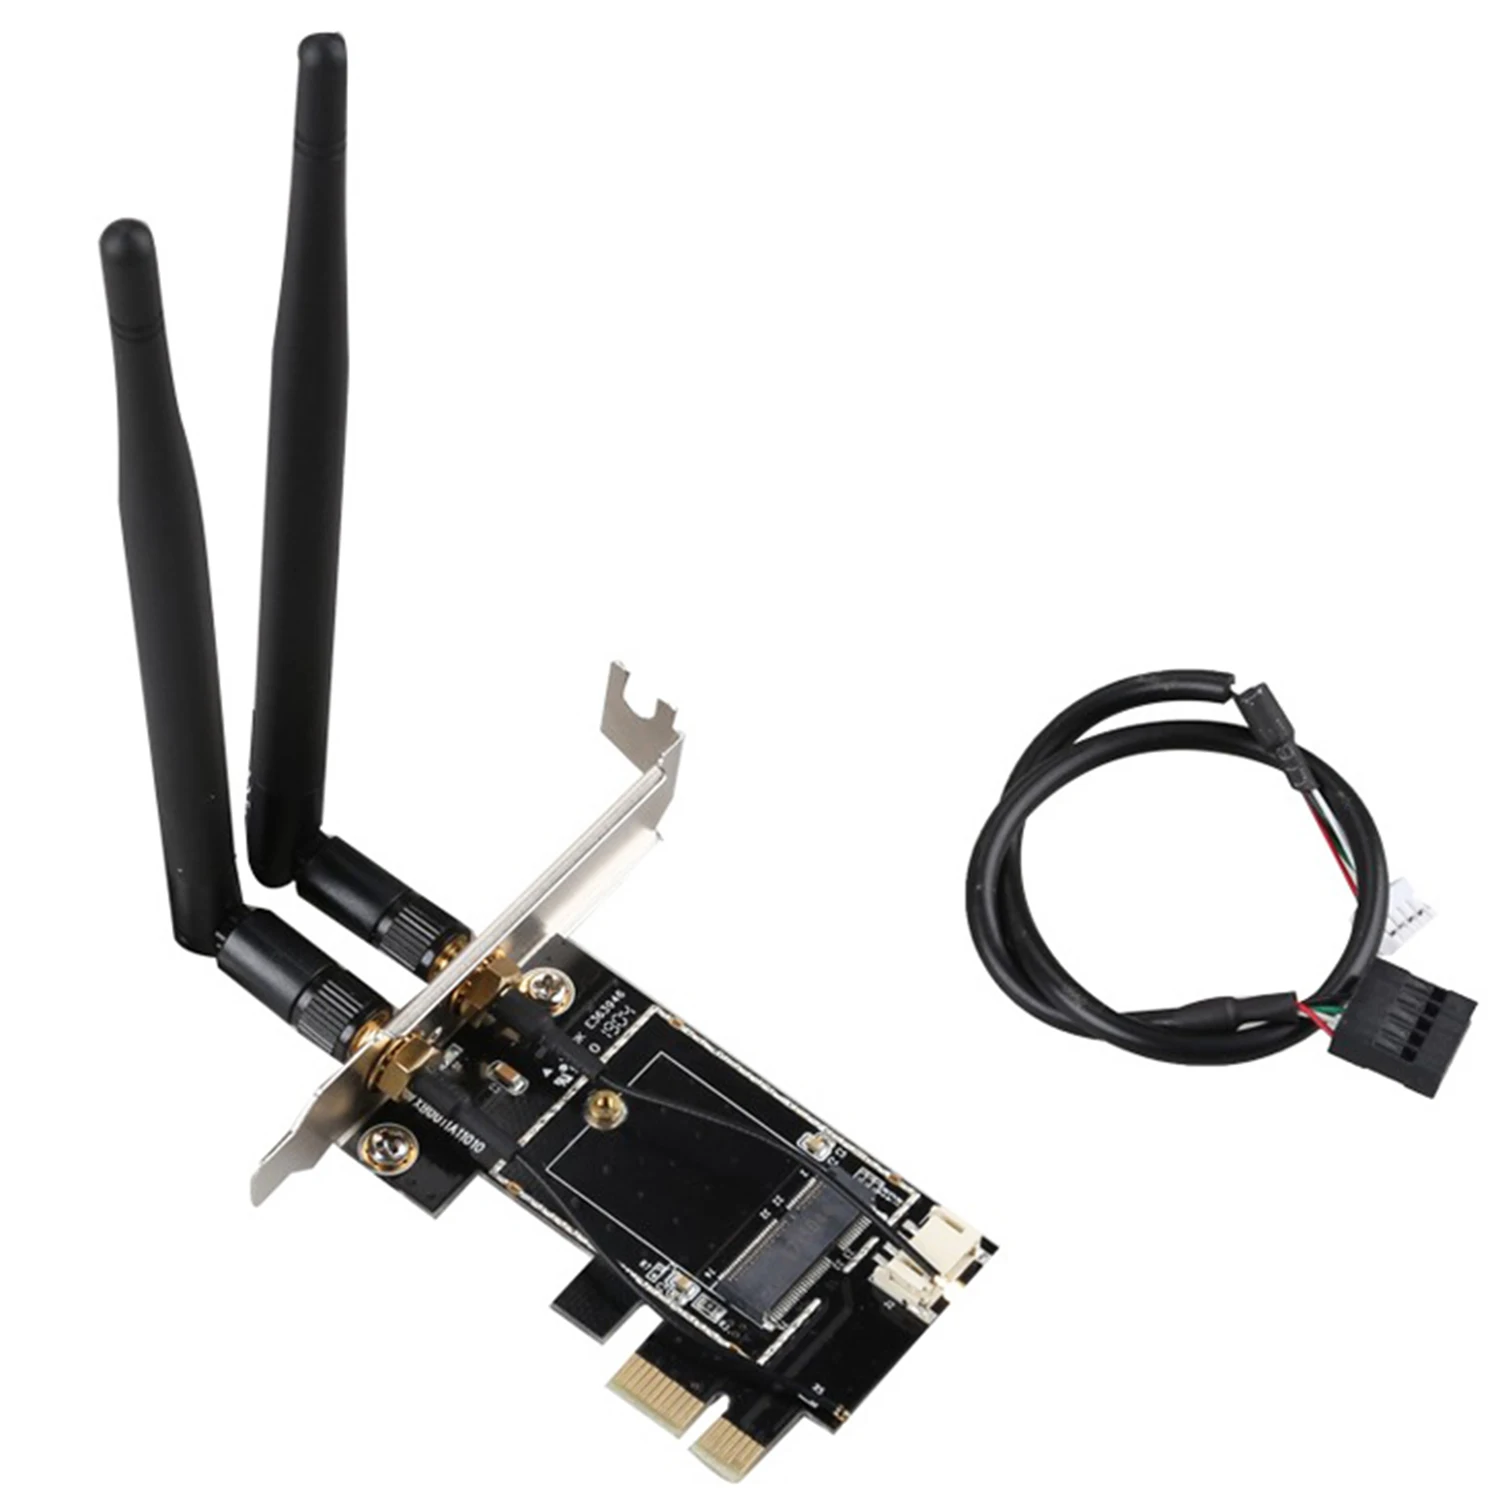 

Desktop Wireless WiFi Bluetooth Network Card Adapter PCIe to M.2 Expansion Card Wifi Adapter M.2 NGFF